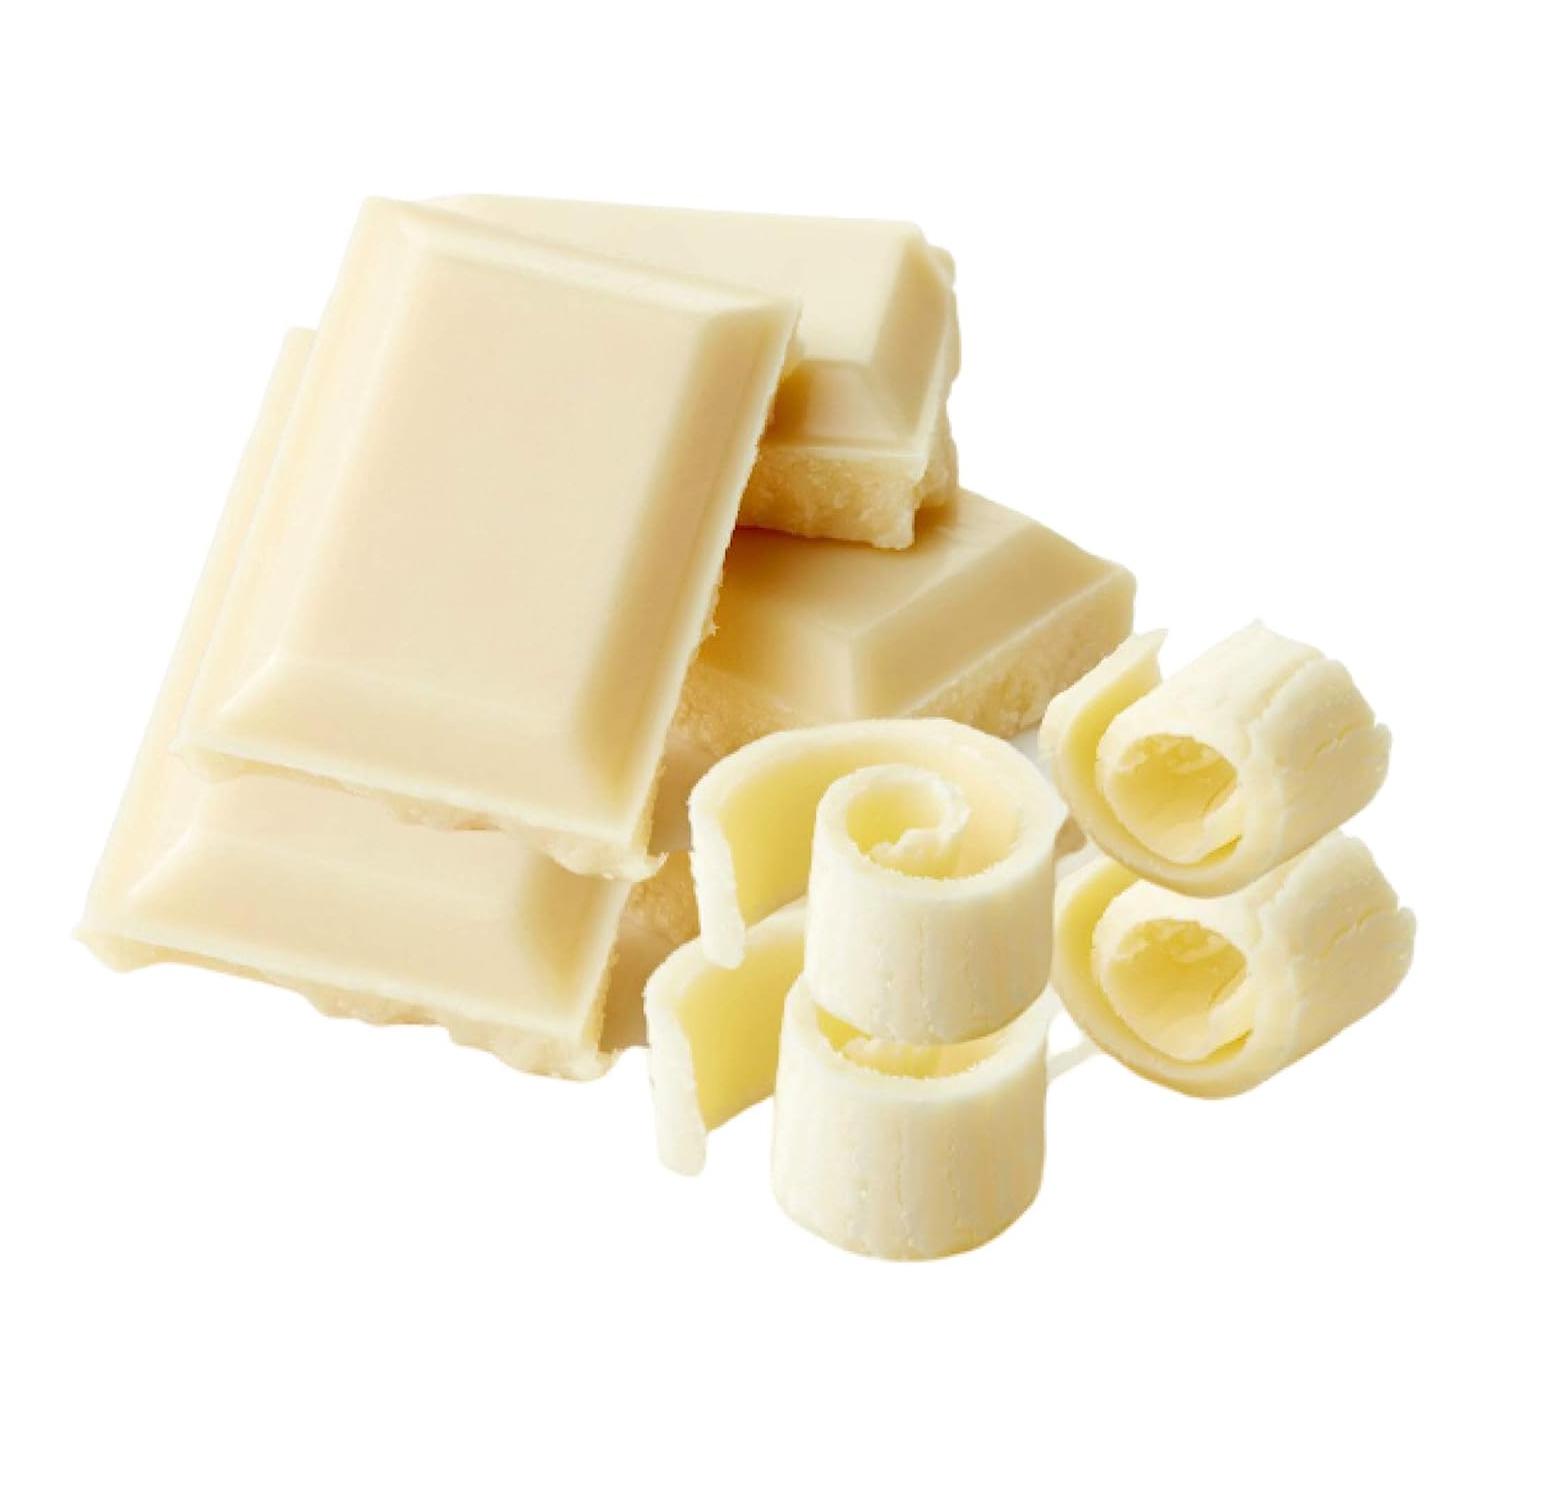 LYONS MAID WHITE CHOCOLATE COMPOUND 2.5KG